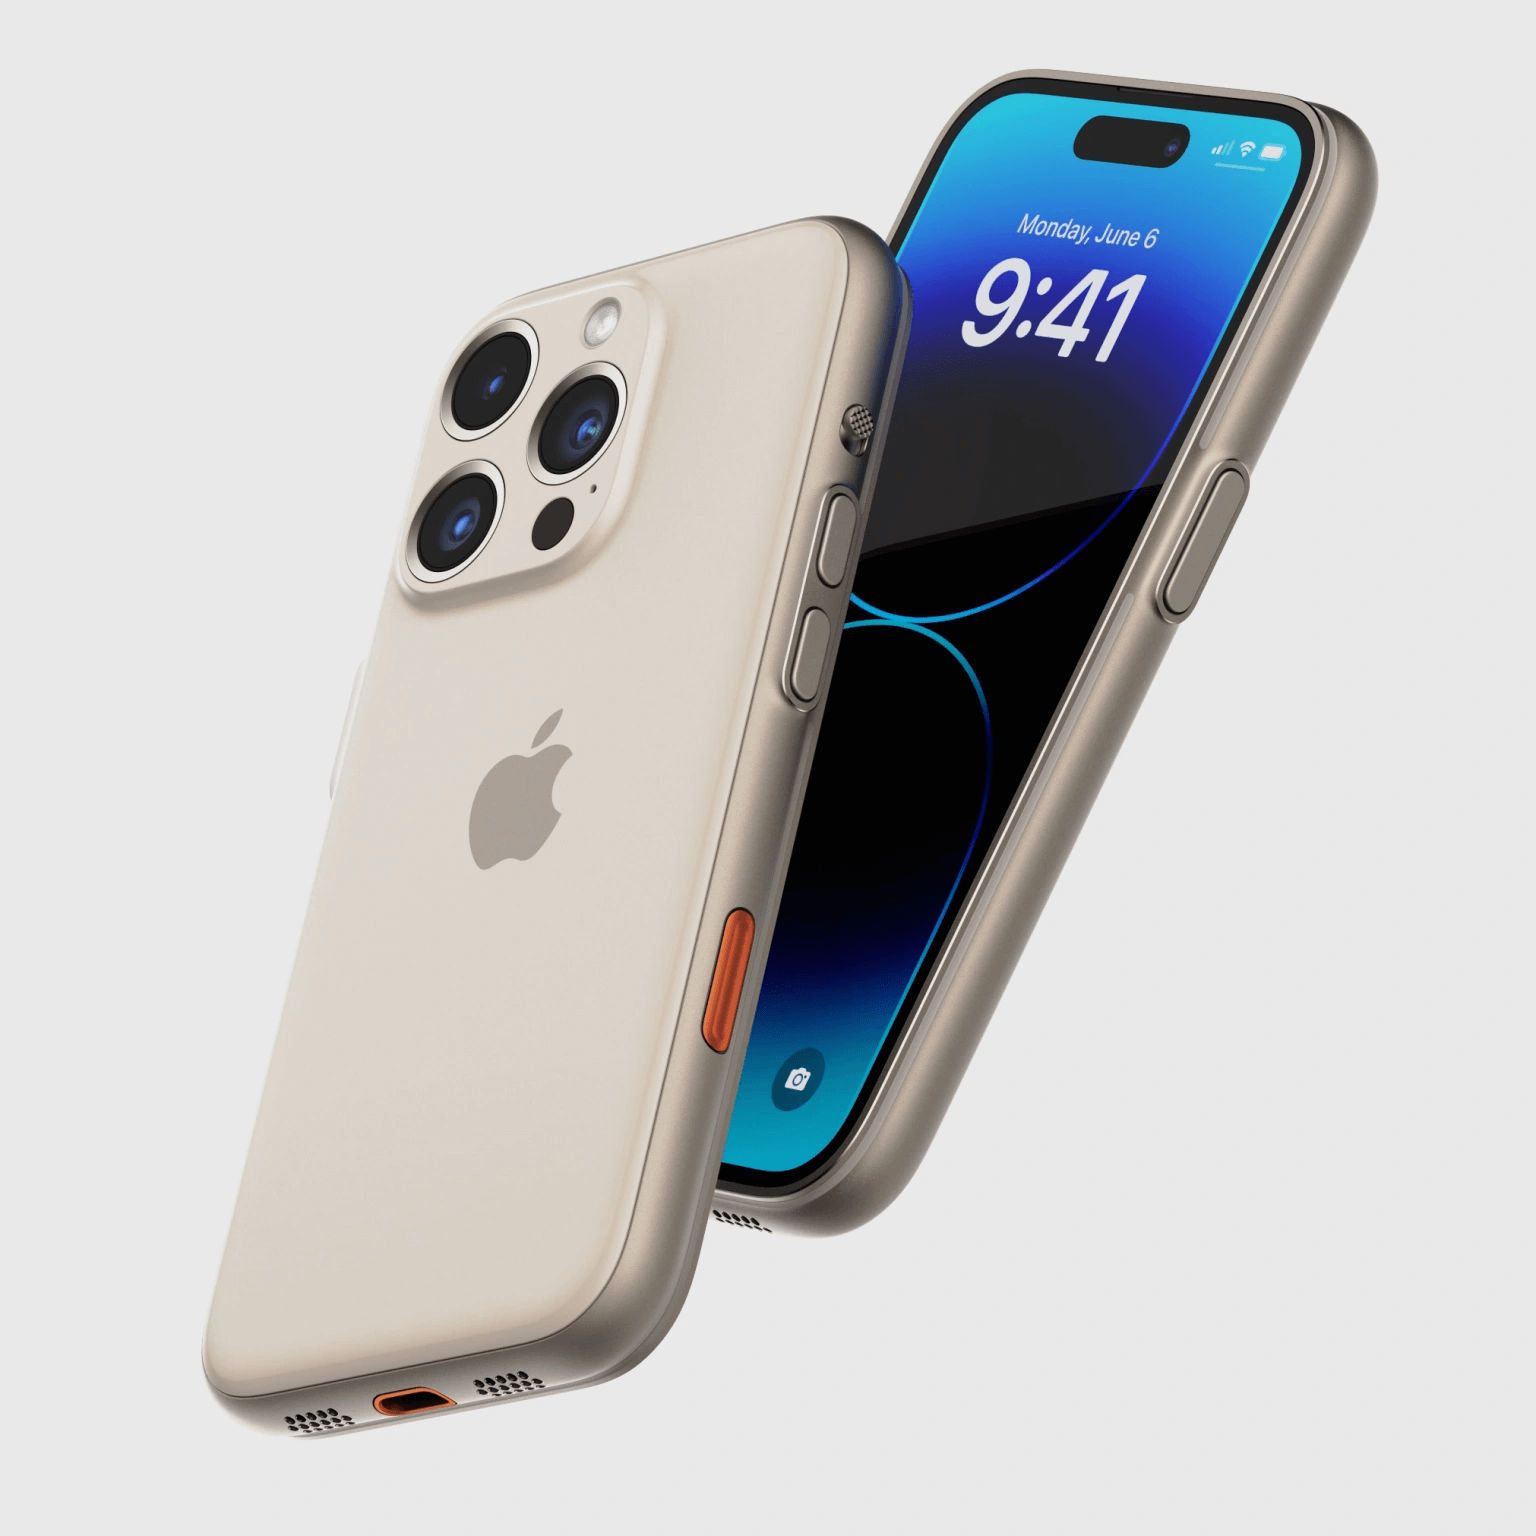 And iPhone Ultra render that looks like an Apple Watch Ultra.